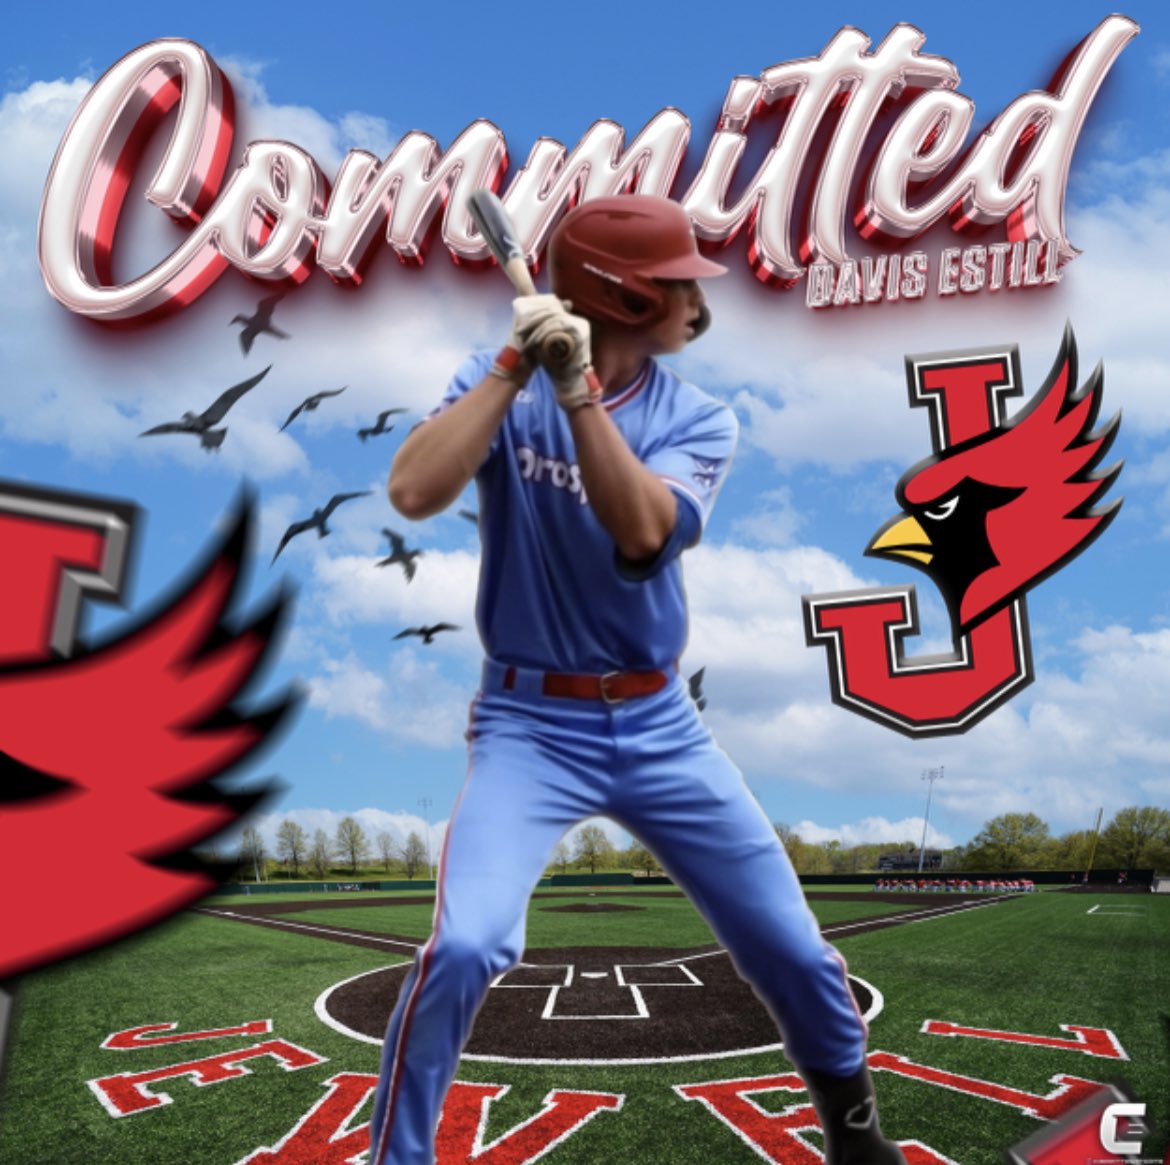 Super excited to announce that I have committed to William Jewell to further my academic and athletic career! I want to thank my family, friends, and coaches for getting me to this point today! @Jewell_Baseball @LanceSpongberg @ESHS_Baseball